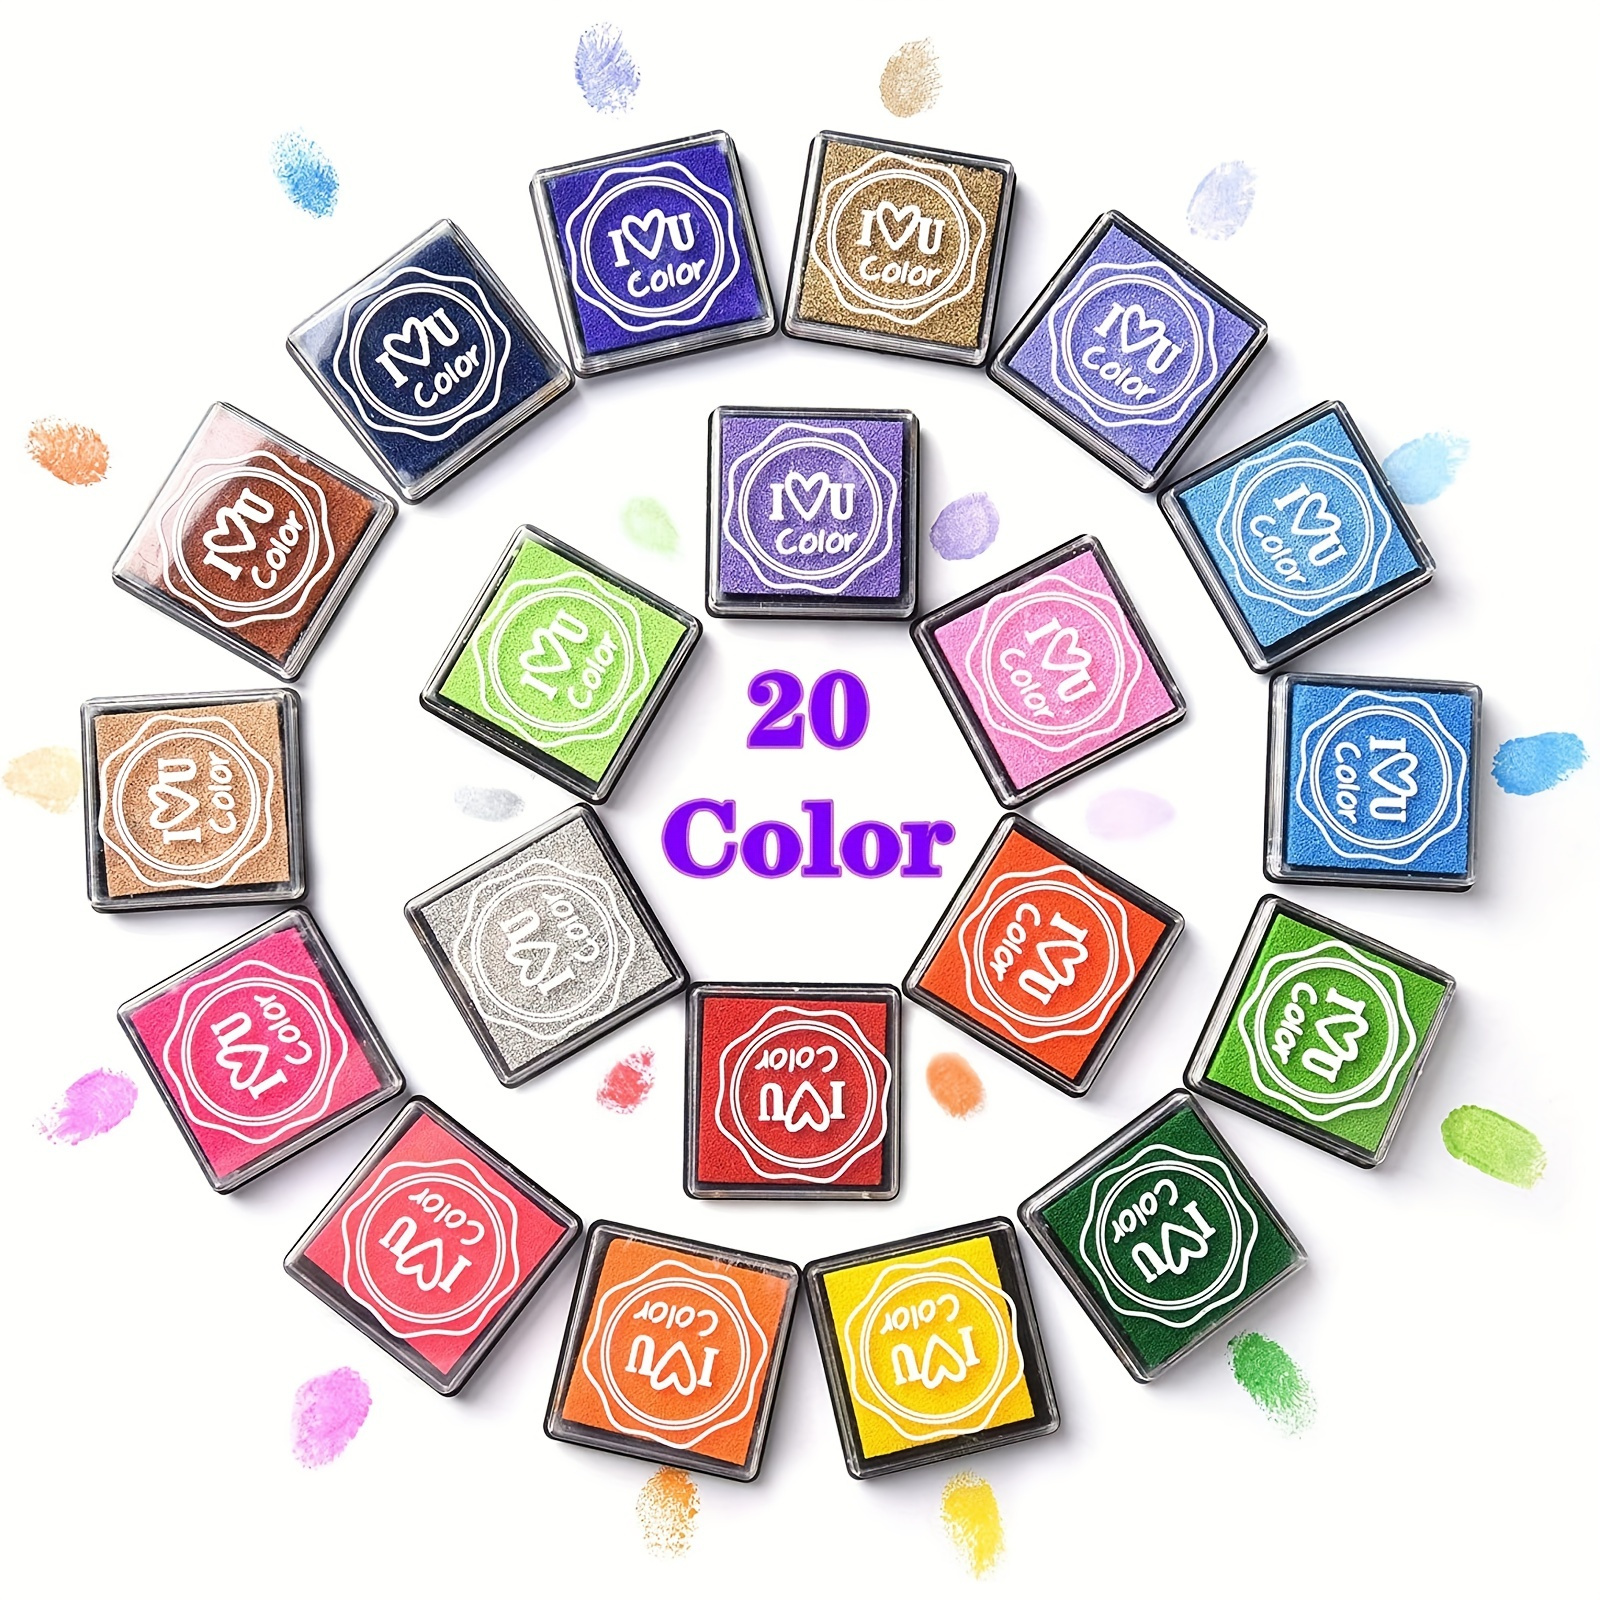 7 Large Round Craft Ink Pads- 12 Colors Rainbow DIY Fingerprint Ink Pad Stamps Partner Washable Color Painting Card Making Stamp Pad for Kids